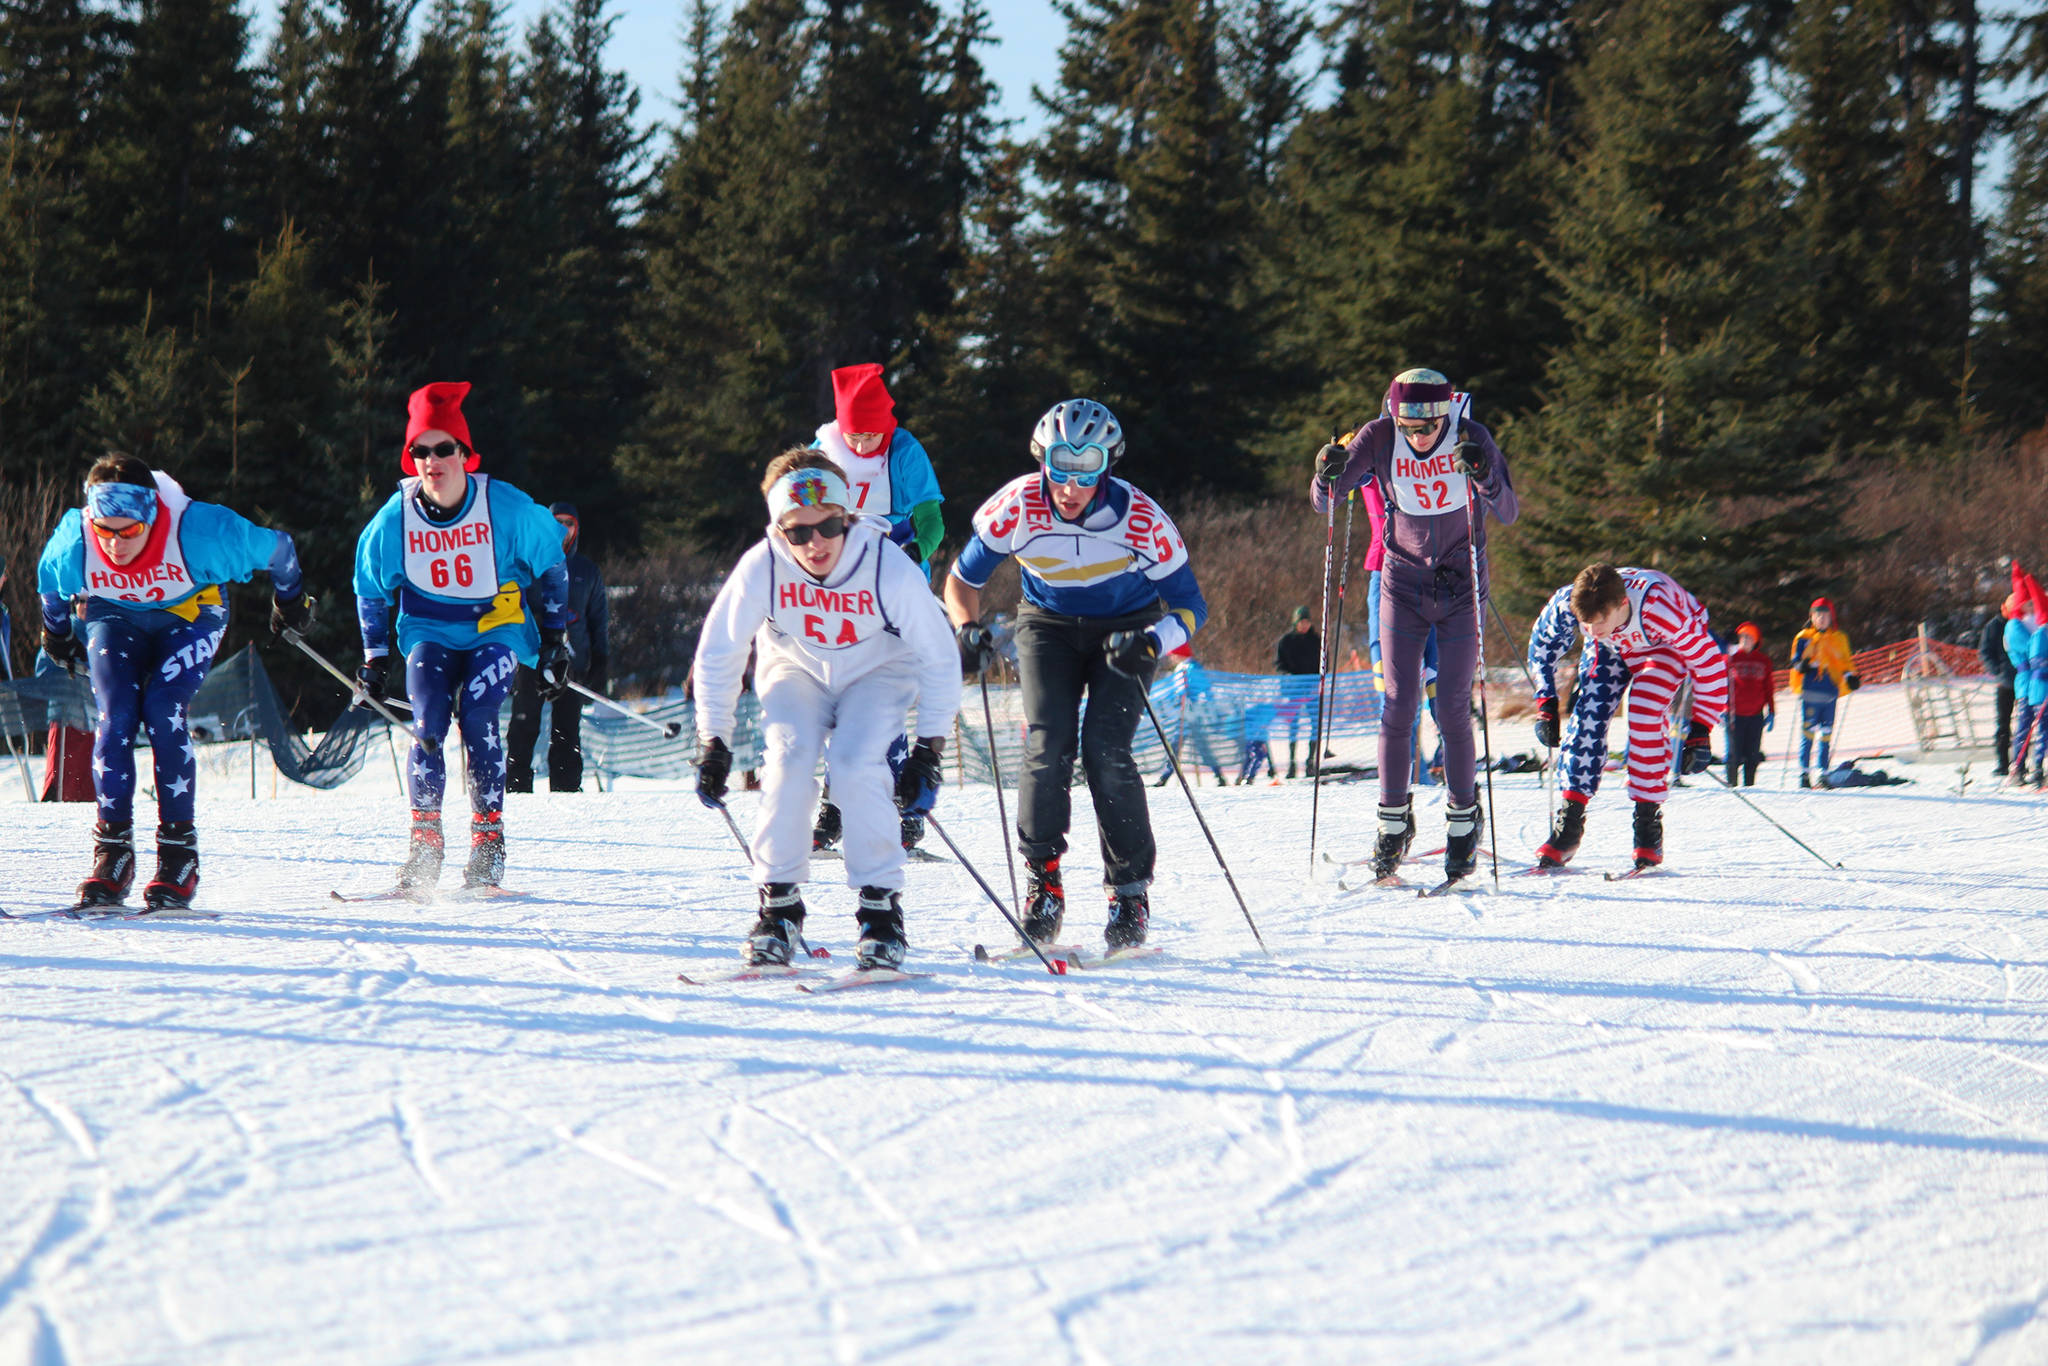 Varsity boy skiers take off from the starting line in a mass start for a 5 kilometer skate ski race Saturday, Feb. 3, 2018 at the Lookout Mountain Ski Trails near Homer, Alaska. Satruday was costume day for the athletes from Homer, Seward, Kenai and Soldotna. (Photo by Megan Pacer/Homer News)